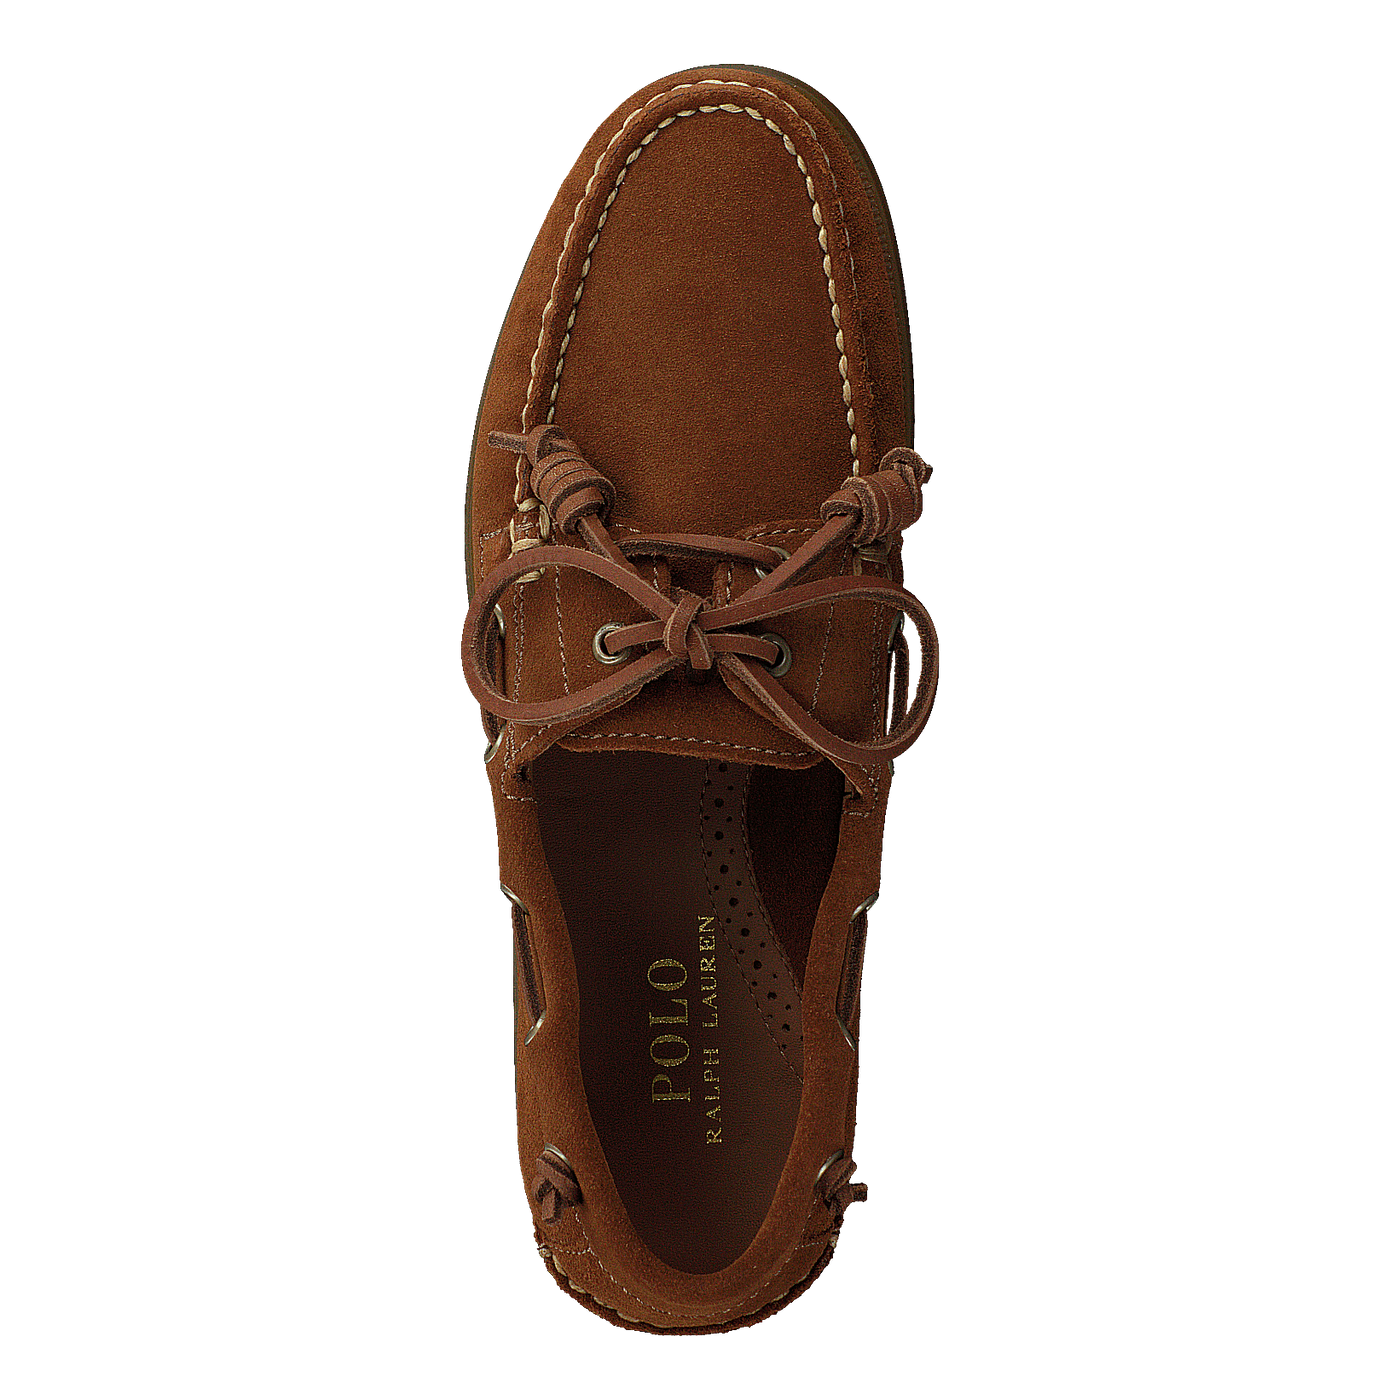 Merton Suede Boat Shoe New Pale Russet